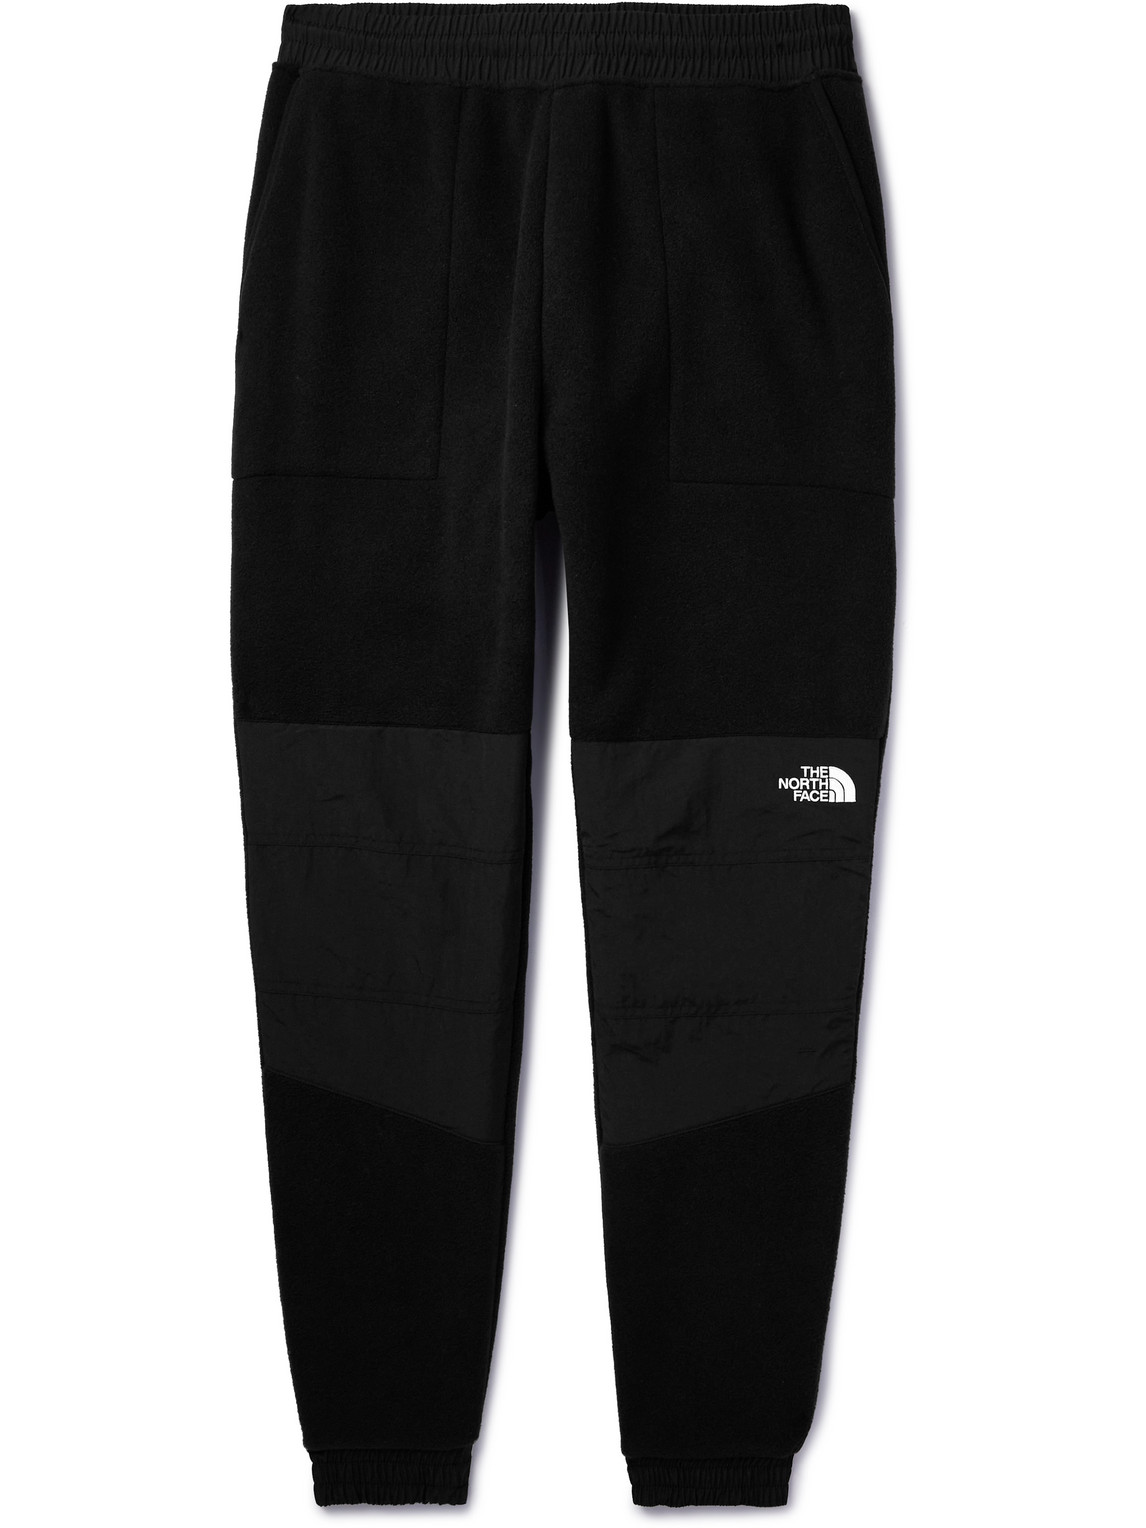 The North Face - Denali Tapered Recycled Polartec Fleece and Shell Sweatpants - Men - Black - M von The North Face